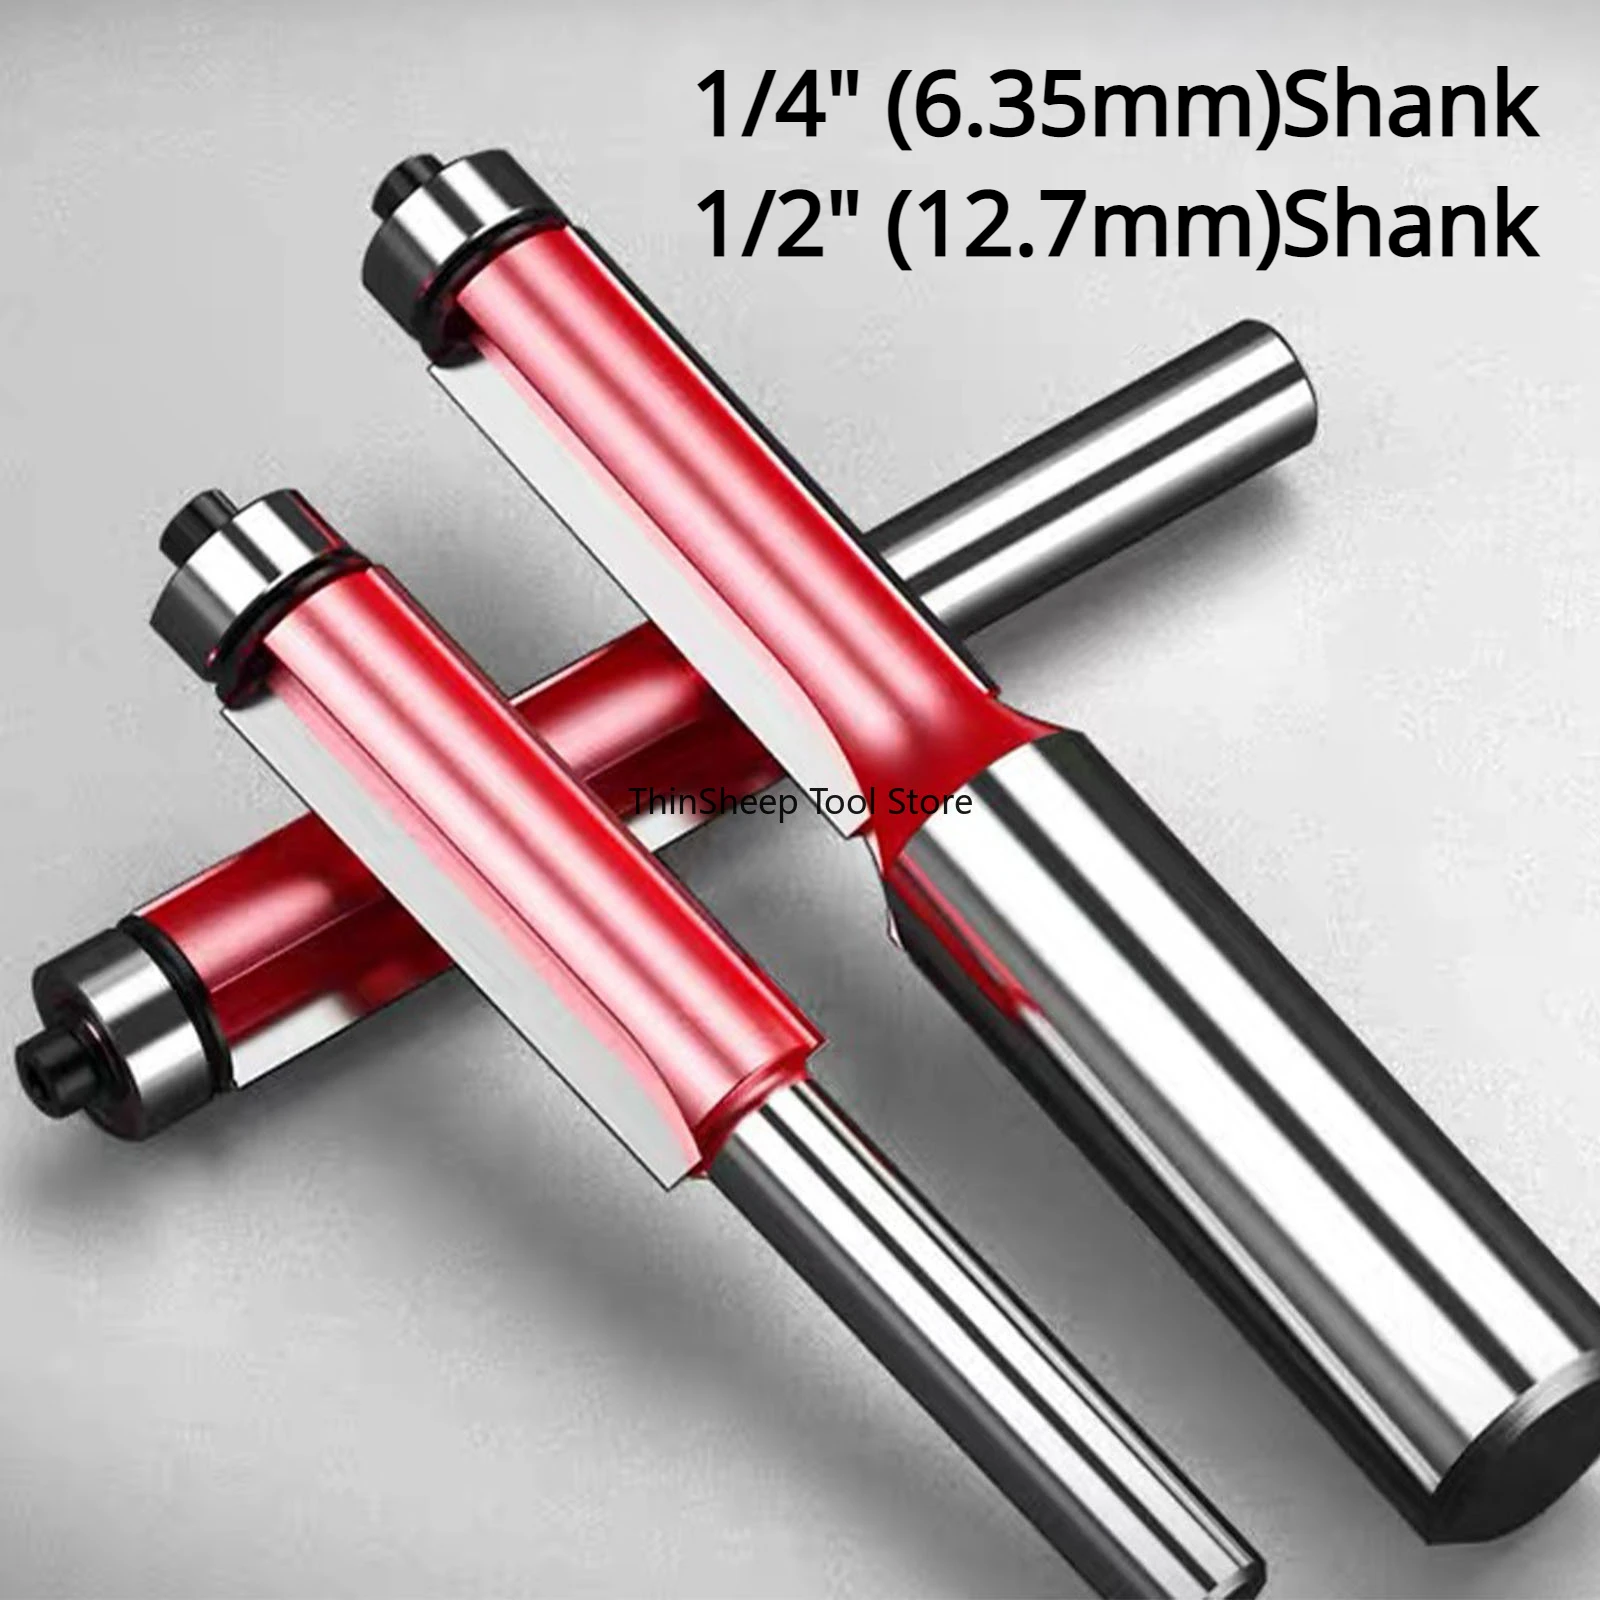 

2pcs TCT 1/4" Shank Woodworking Milling Cutter Double Edged Straight Blade Trim Router Grooving Tool CNC